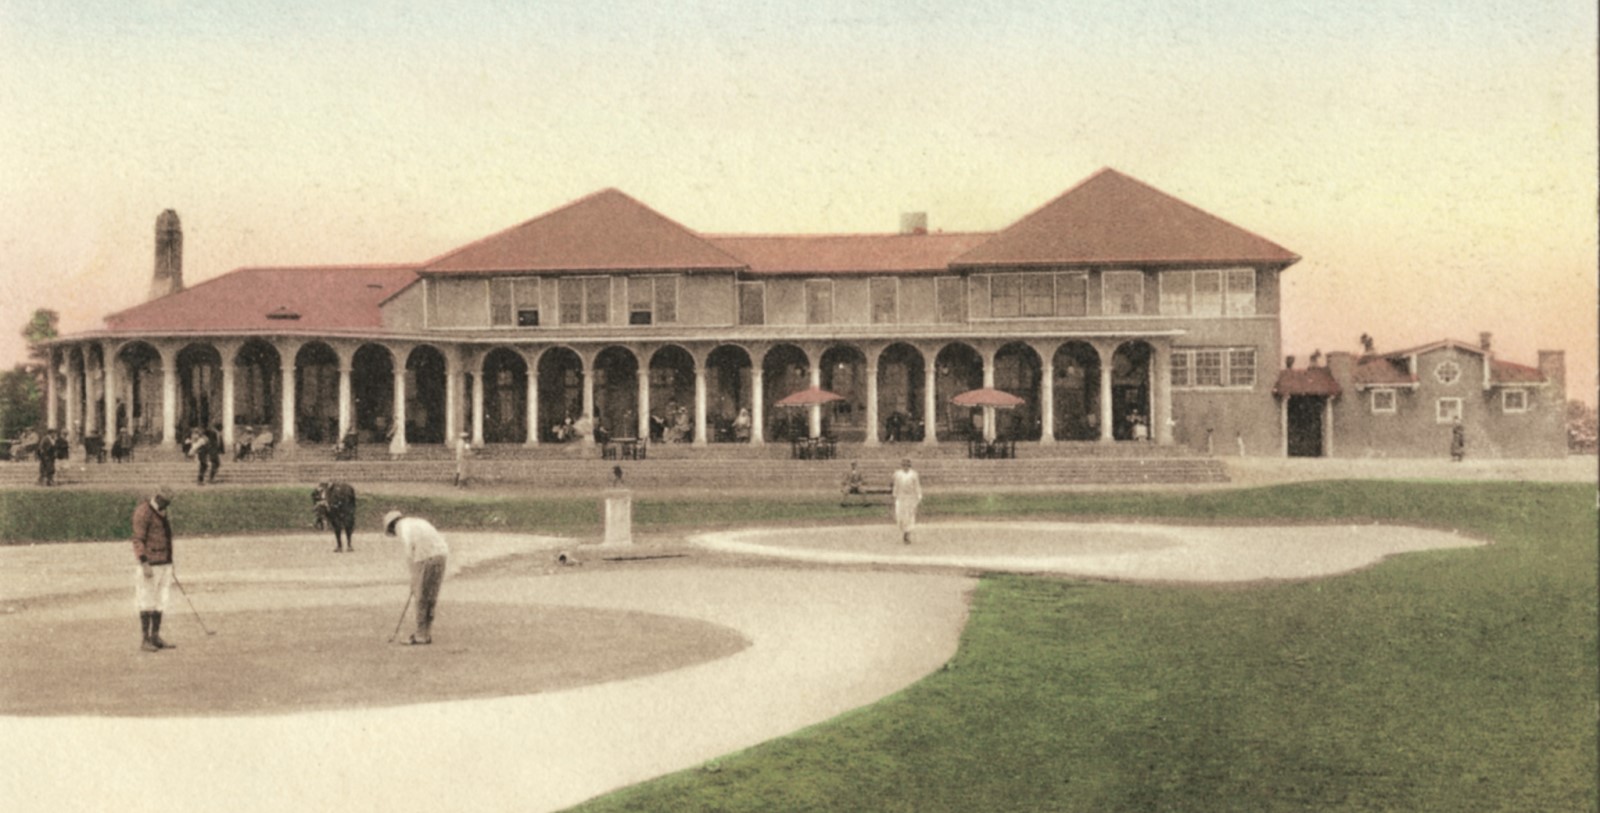 Historic Image of the Golf Course at Pinehurst Resort, Member of Historic Hotels of America